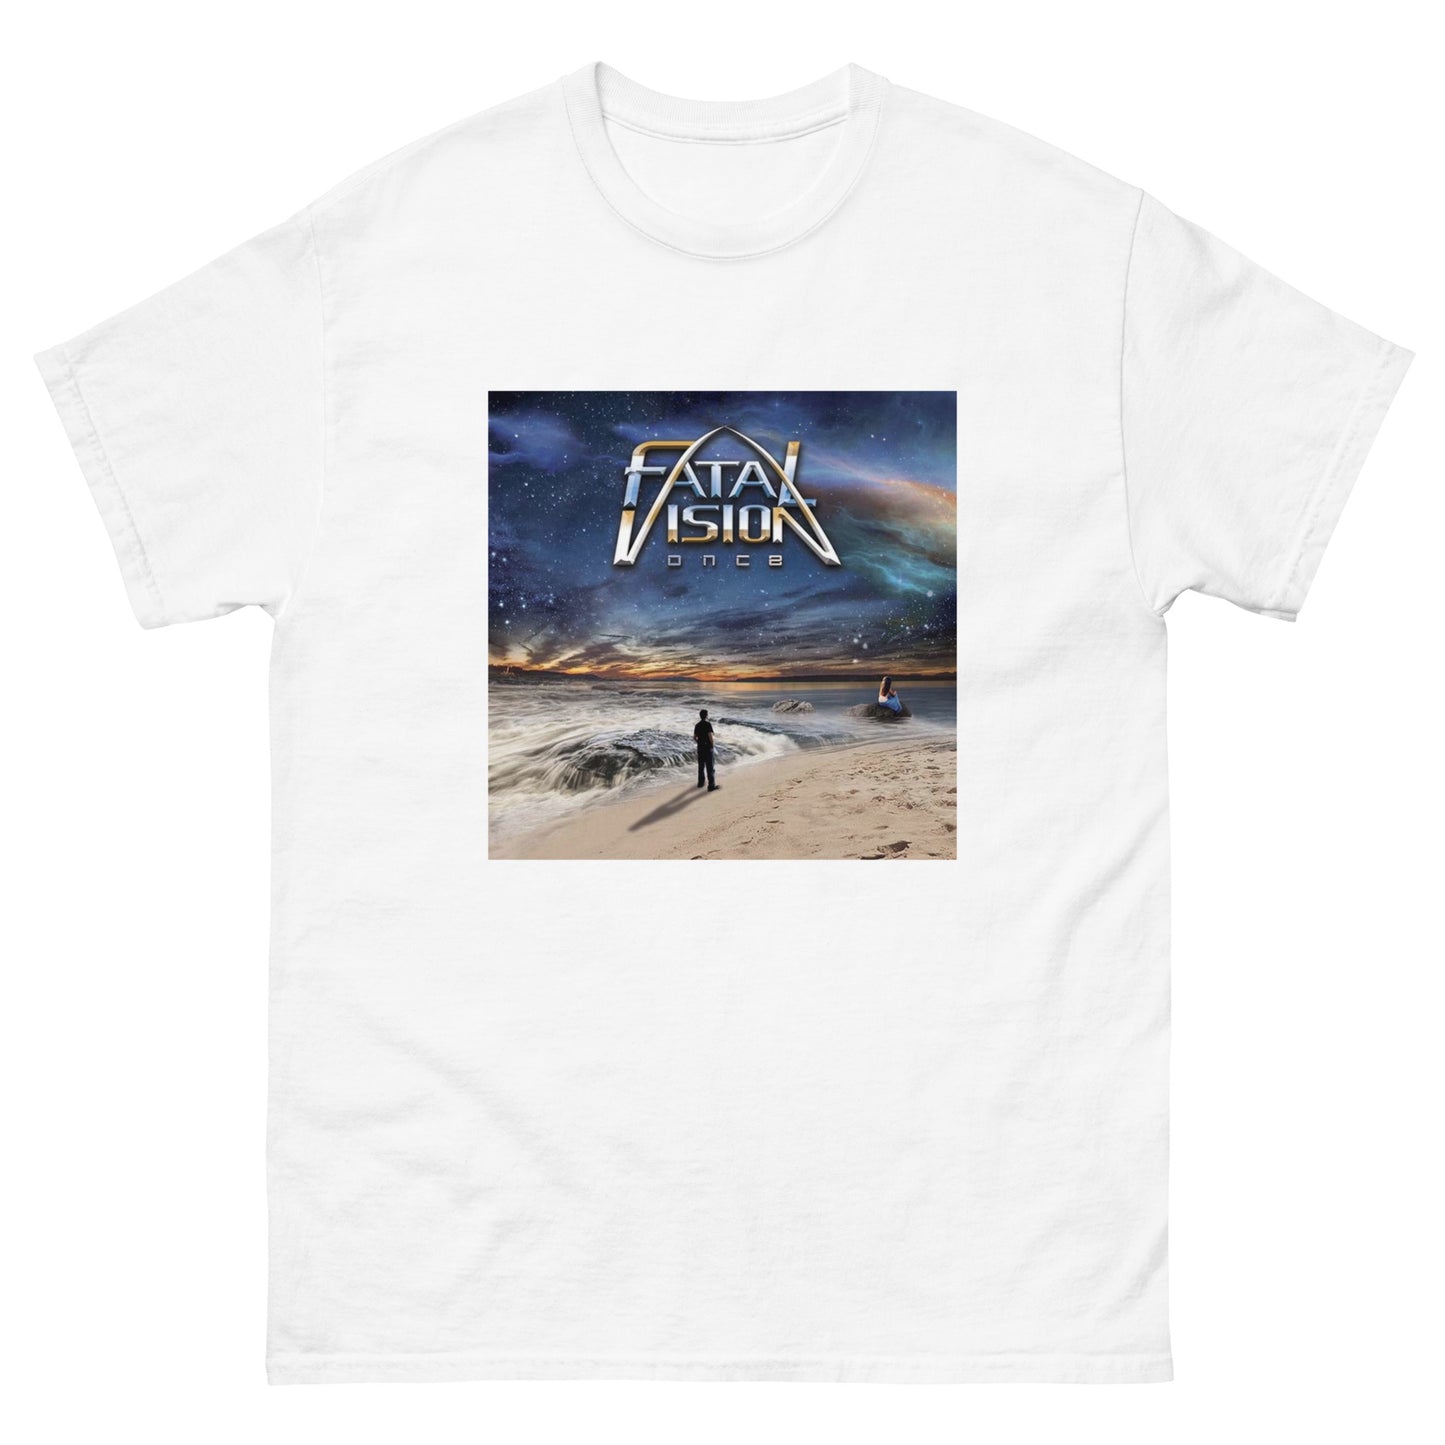 The Fatal Vision Once Tee